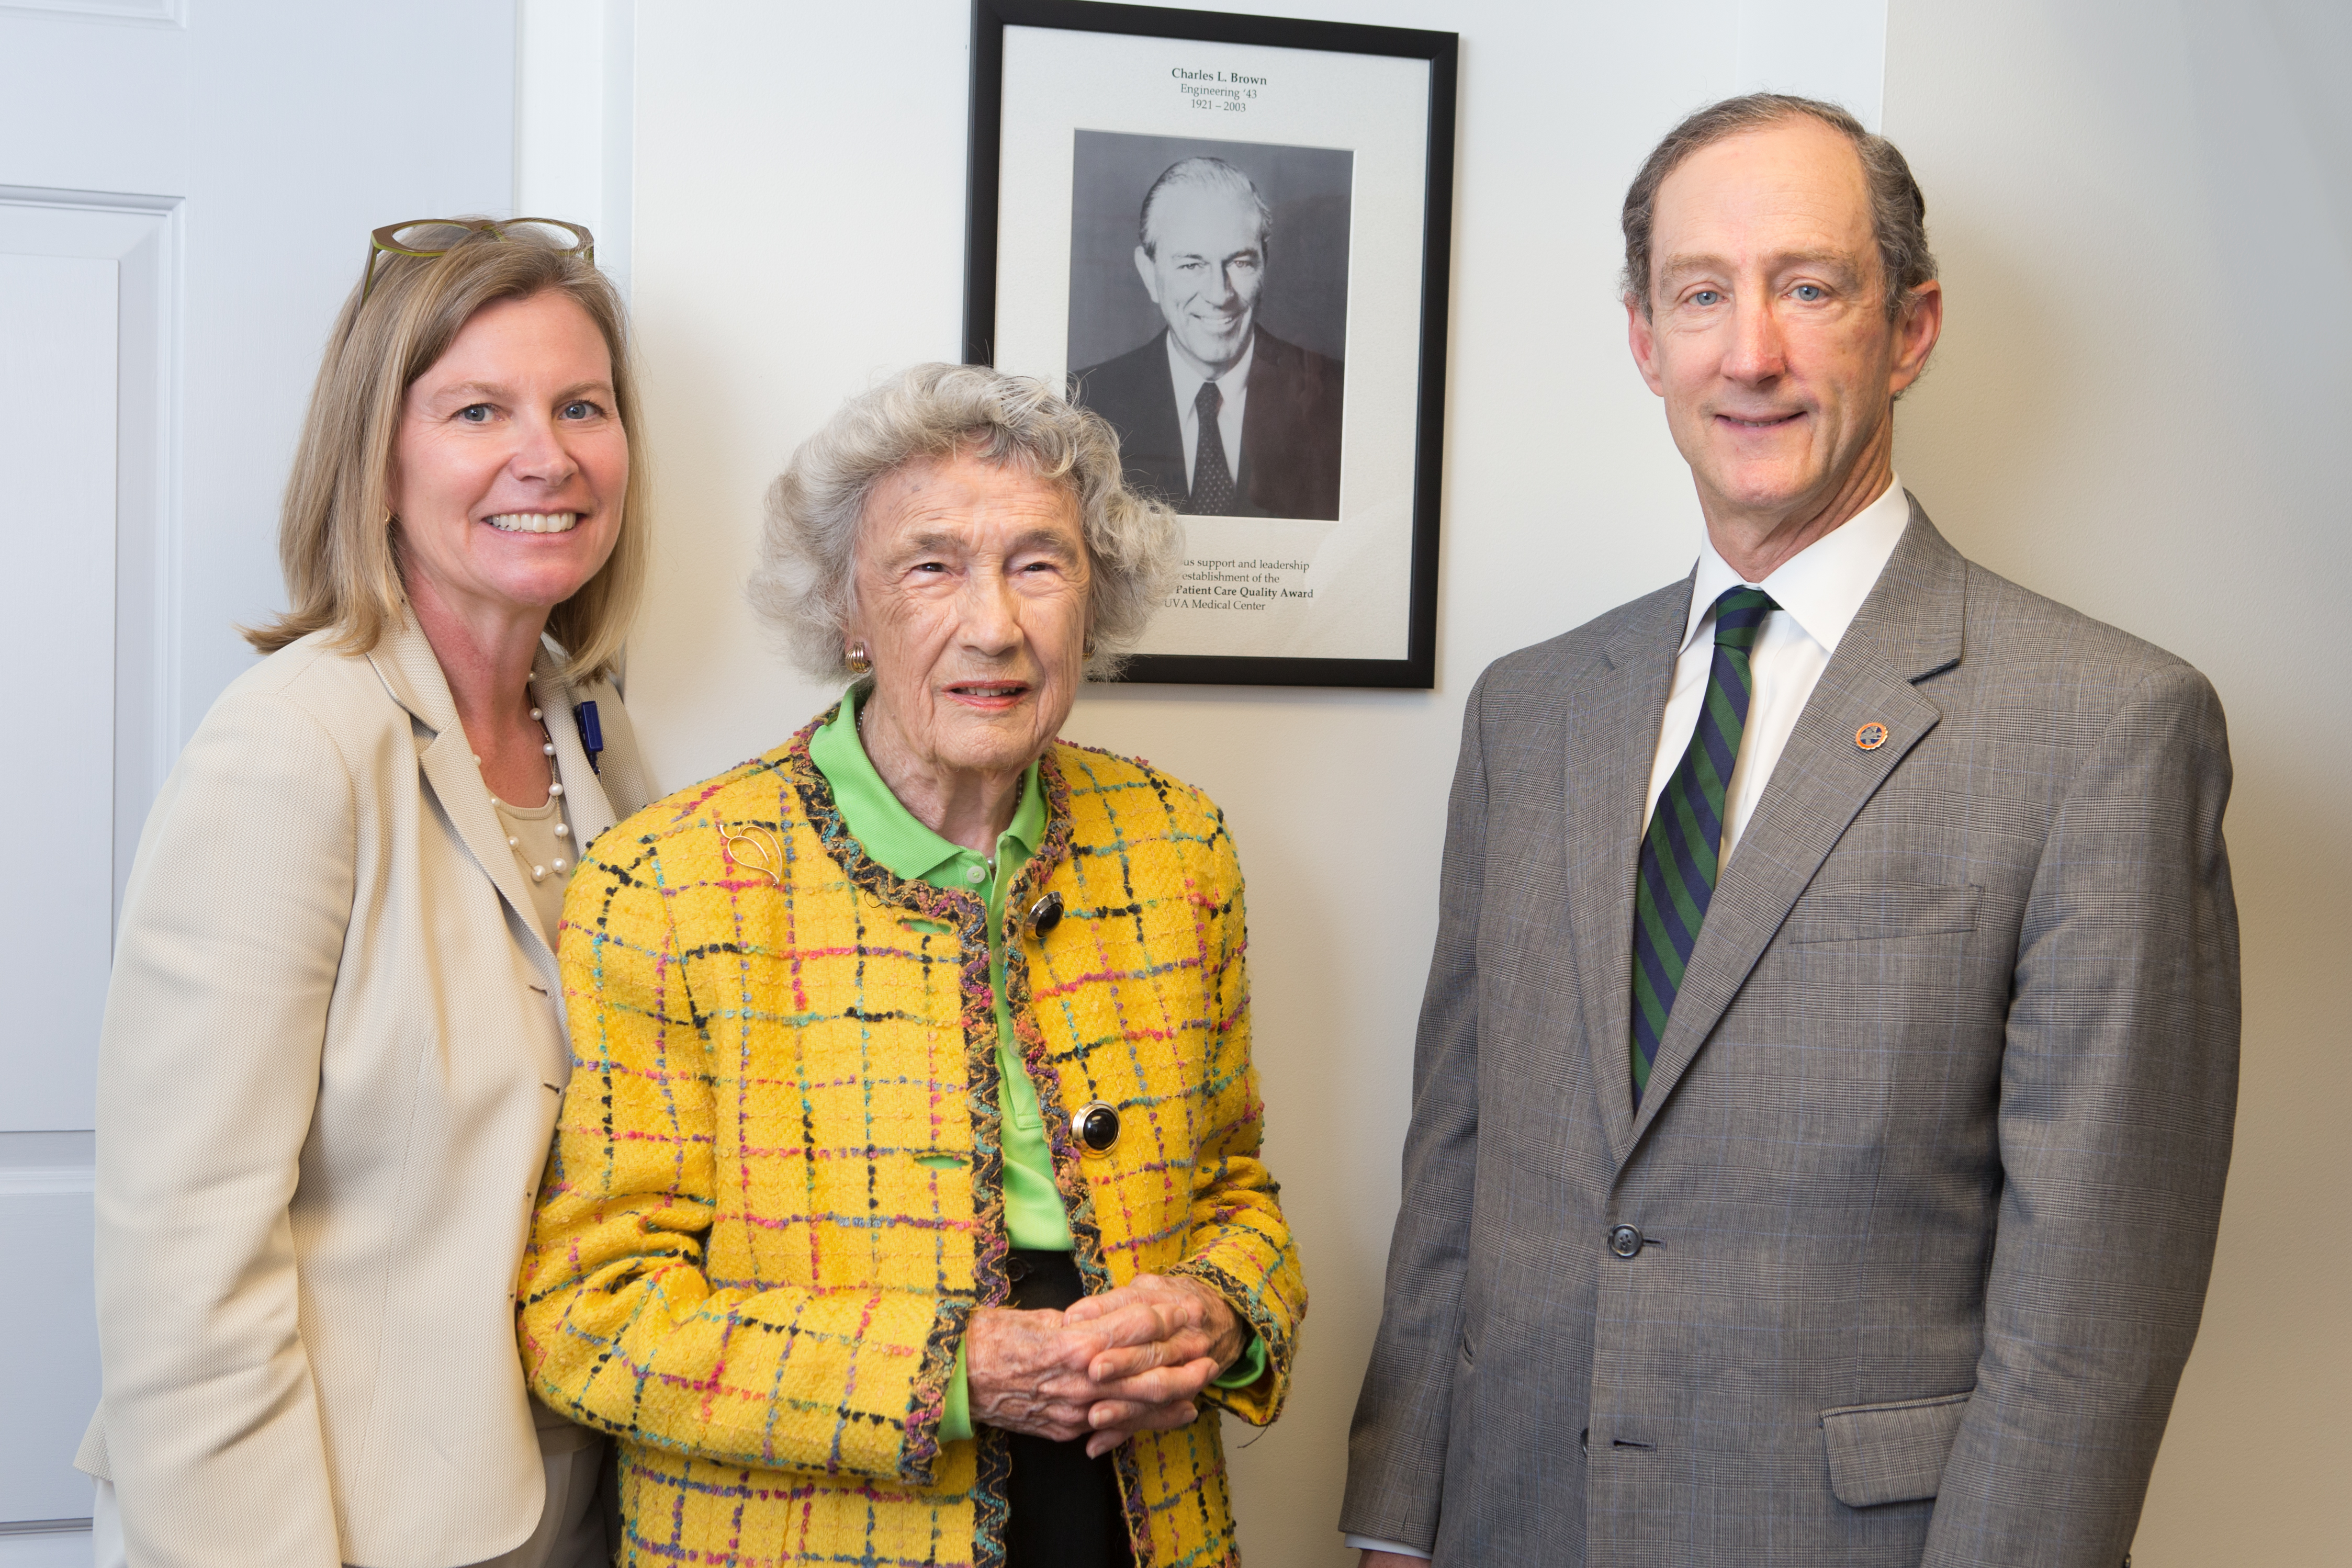 Ann Lee Saunders Brown (center) celebrates with Drs. Tracey Hoke and Rick Shannon at the unveiling of a portrait of her late husband, Charles Brown, 